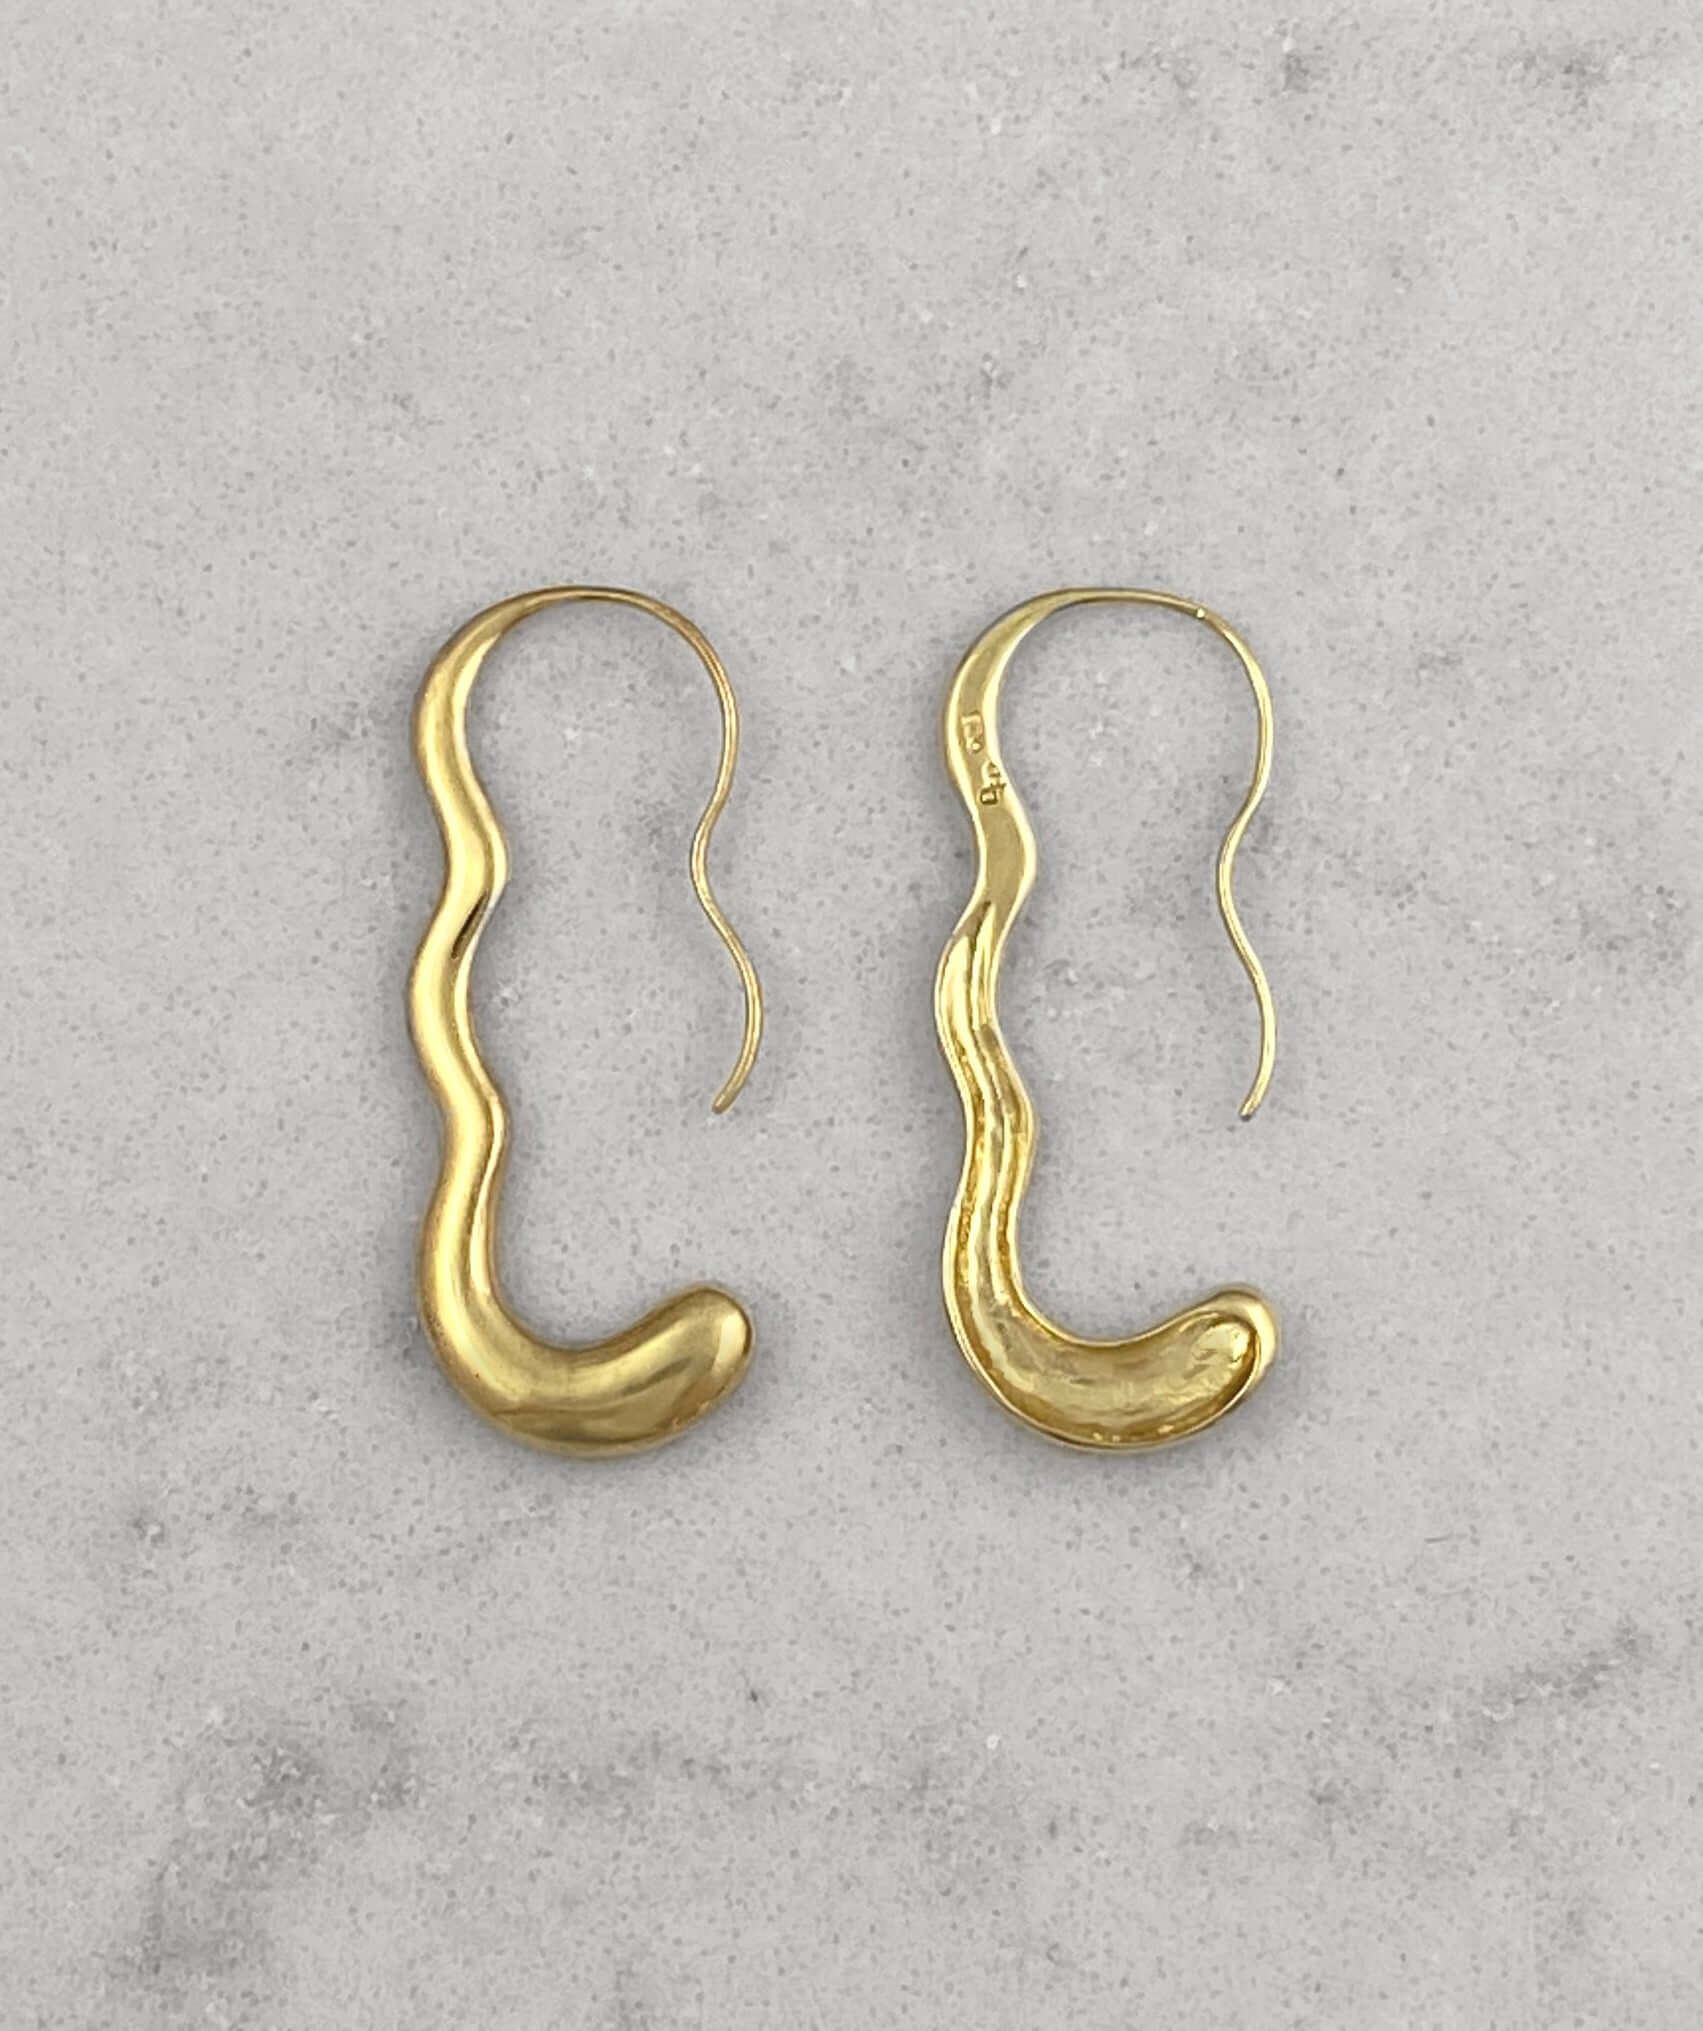 Product photo of earrings front and back